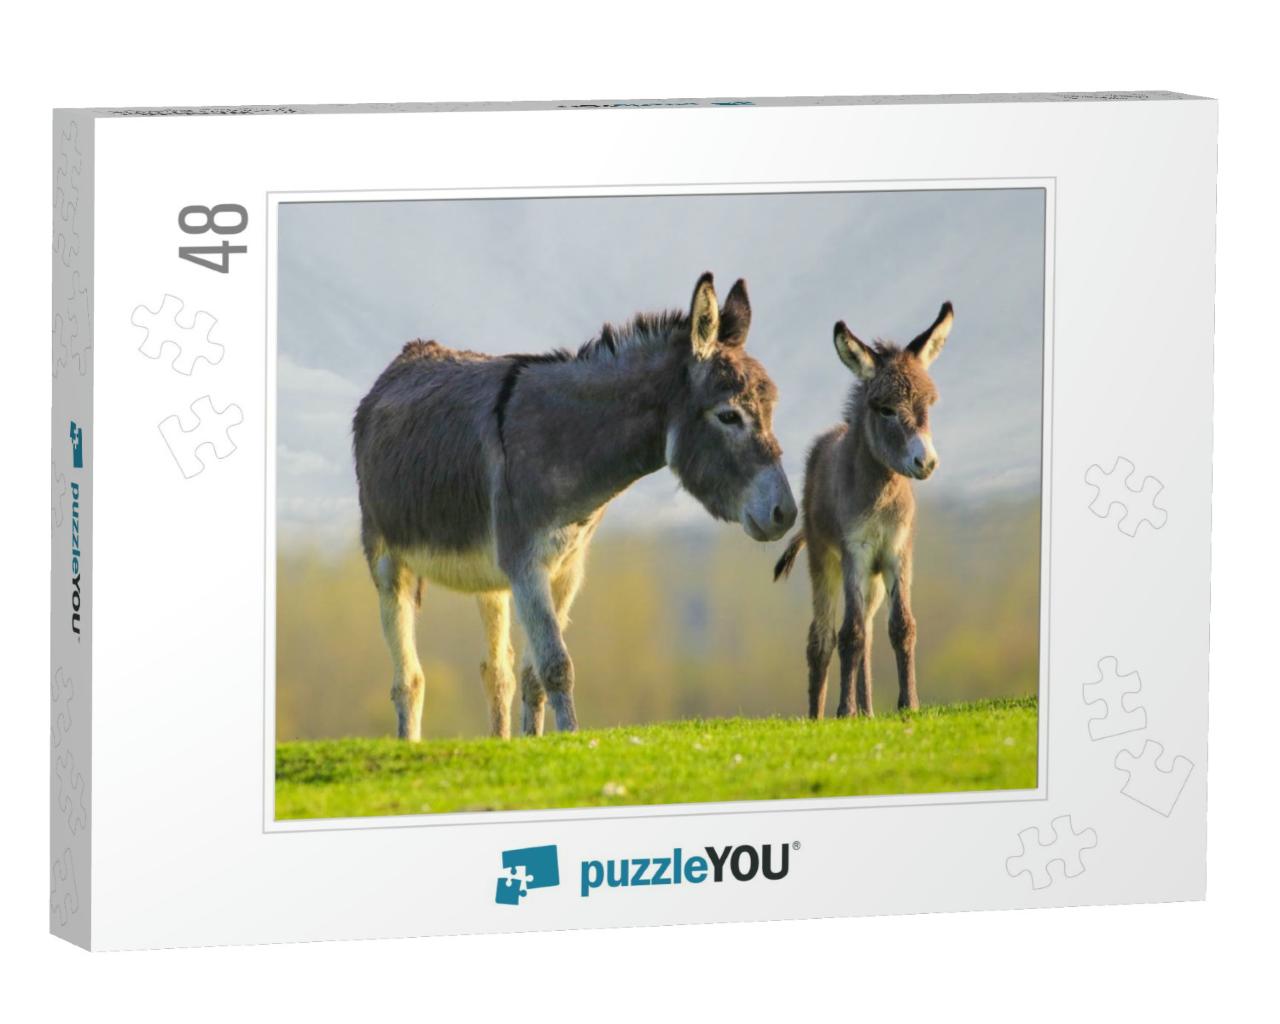 Grey Cute Baby Donkey & Mother on Floral Meadow... Jigsaw Puzzle with 48 pieces